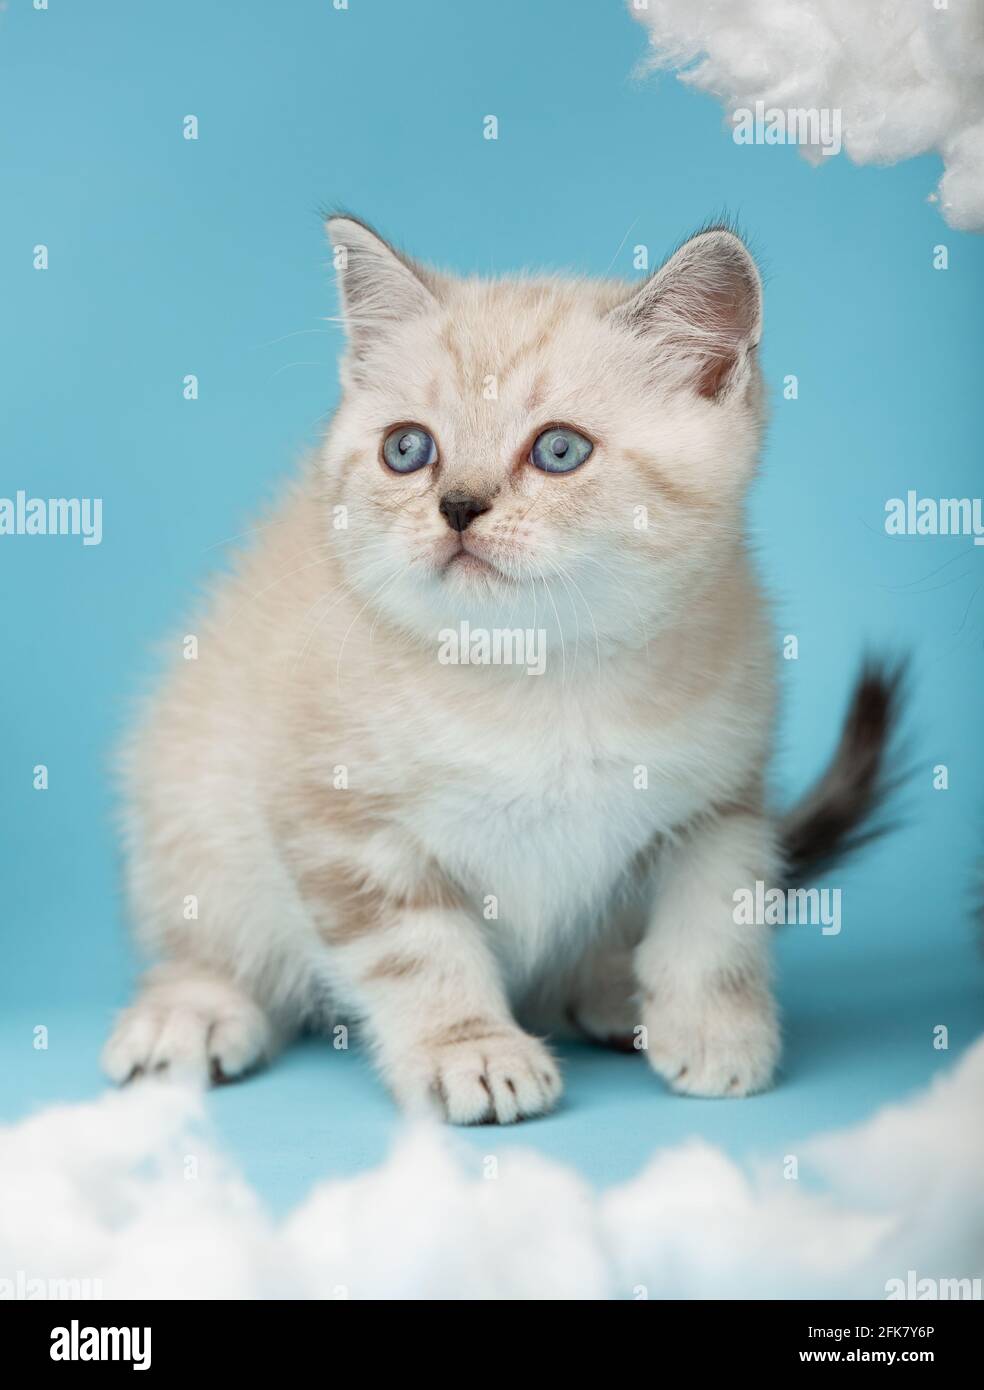 Playful cream-colored Scottish kitten with blue eyes sits on a blue background and is about to attack. Pets, animals and cats concept. Stock Photo